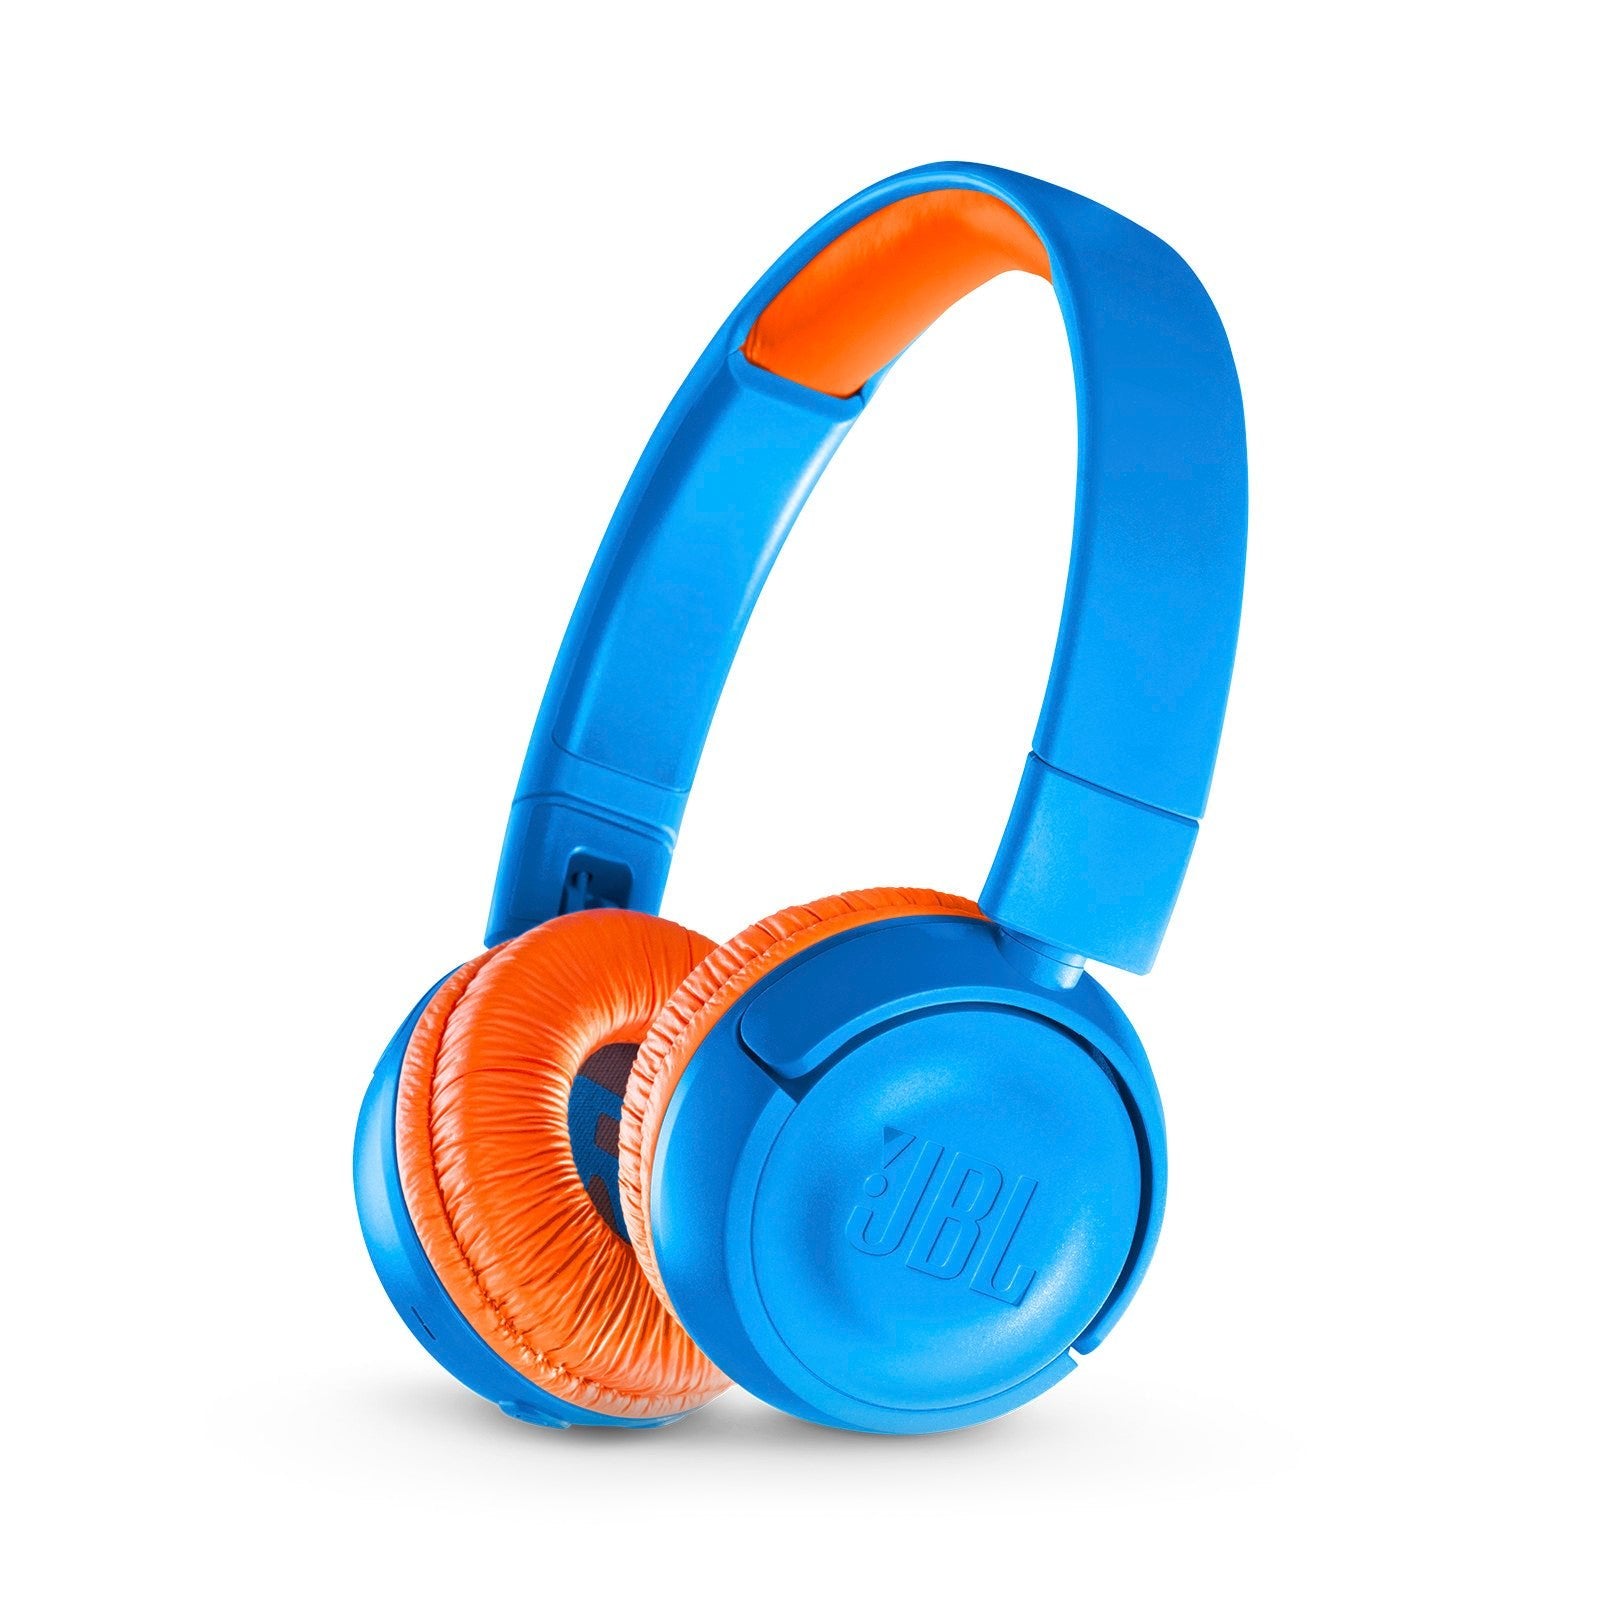 KIDS HEADPHONES MADE FOR YOUNG MUSIC LOVERS